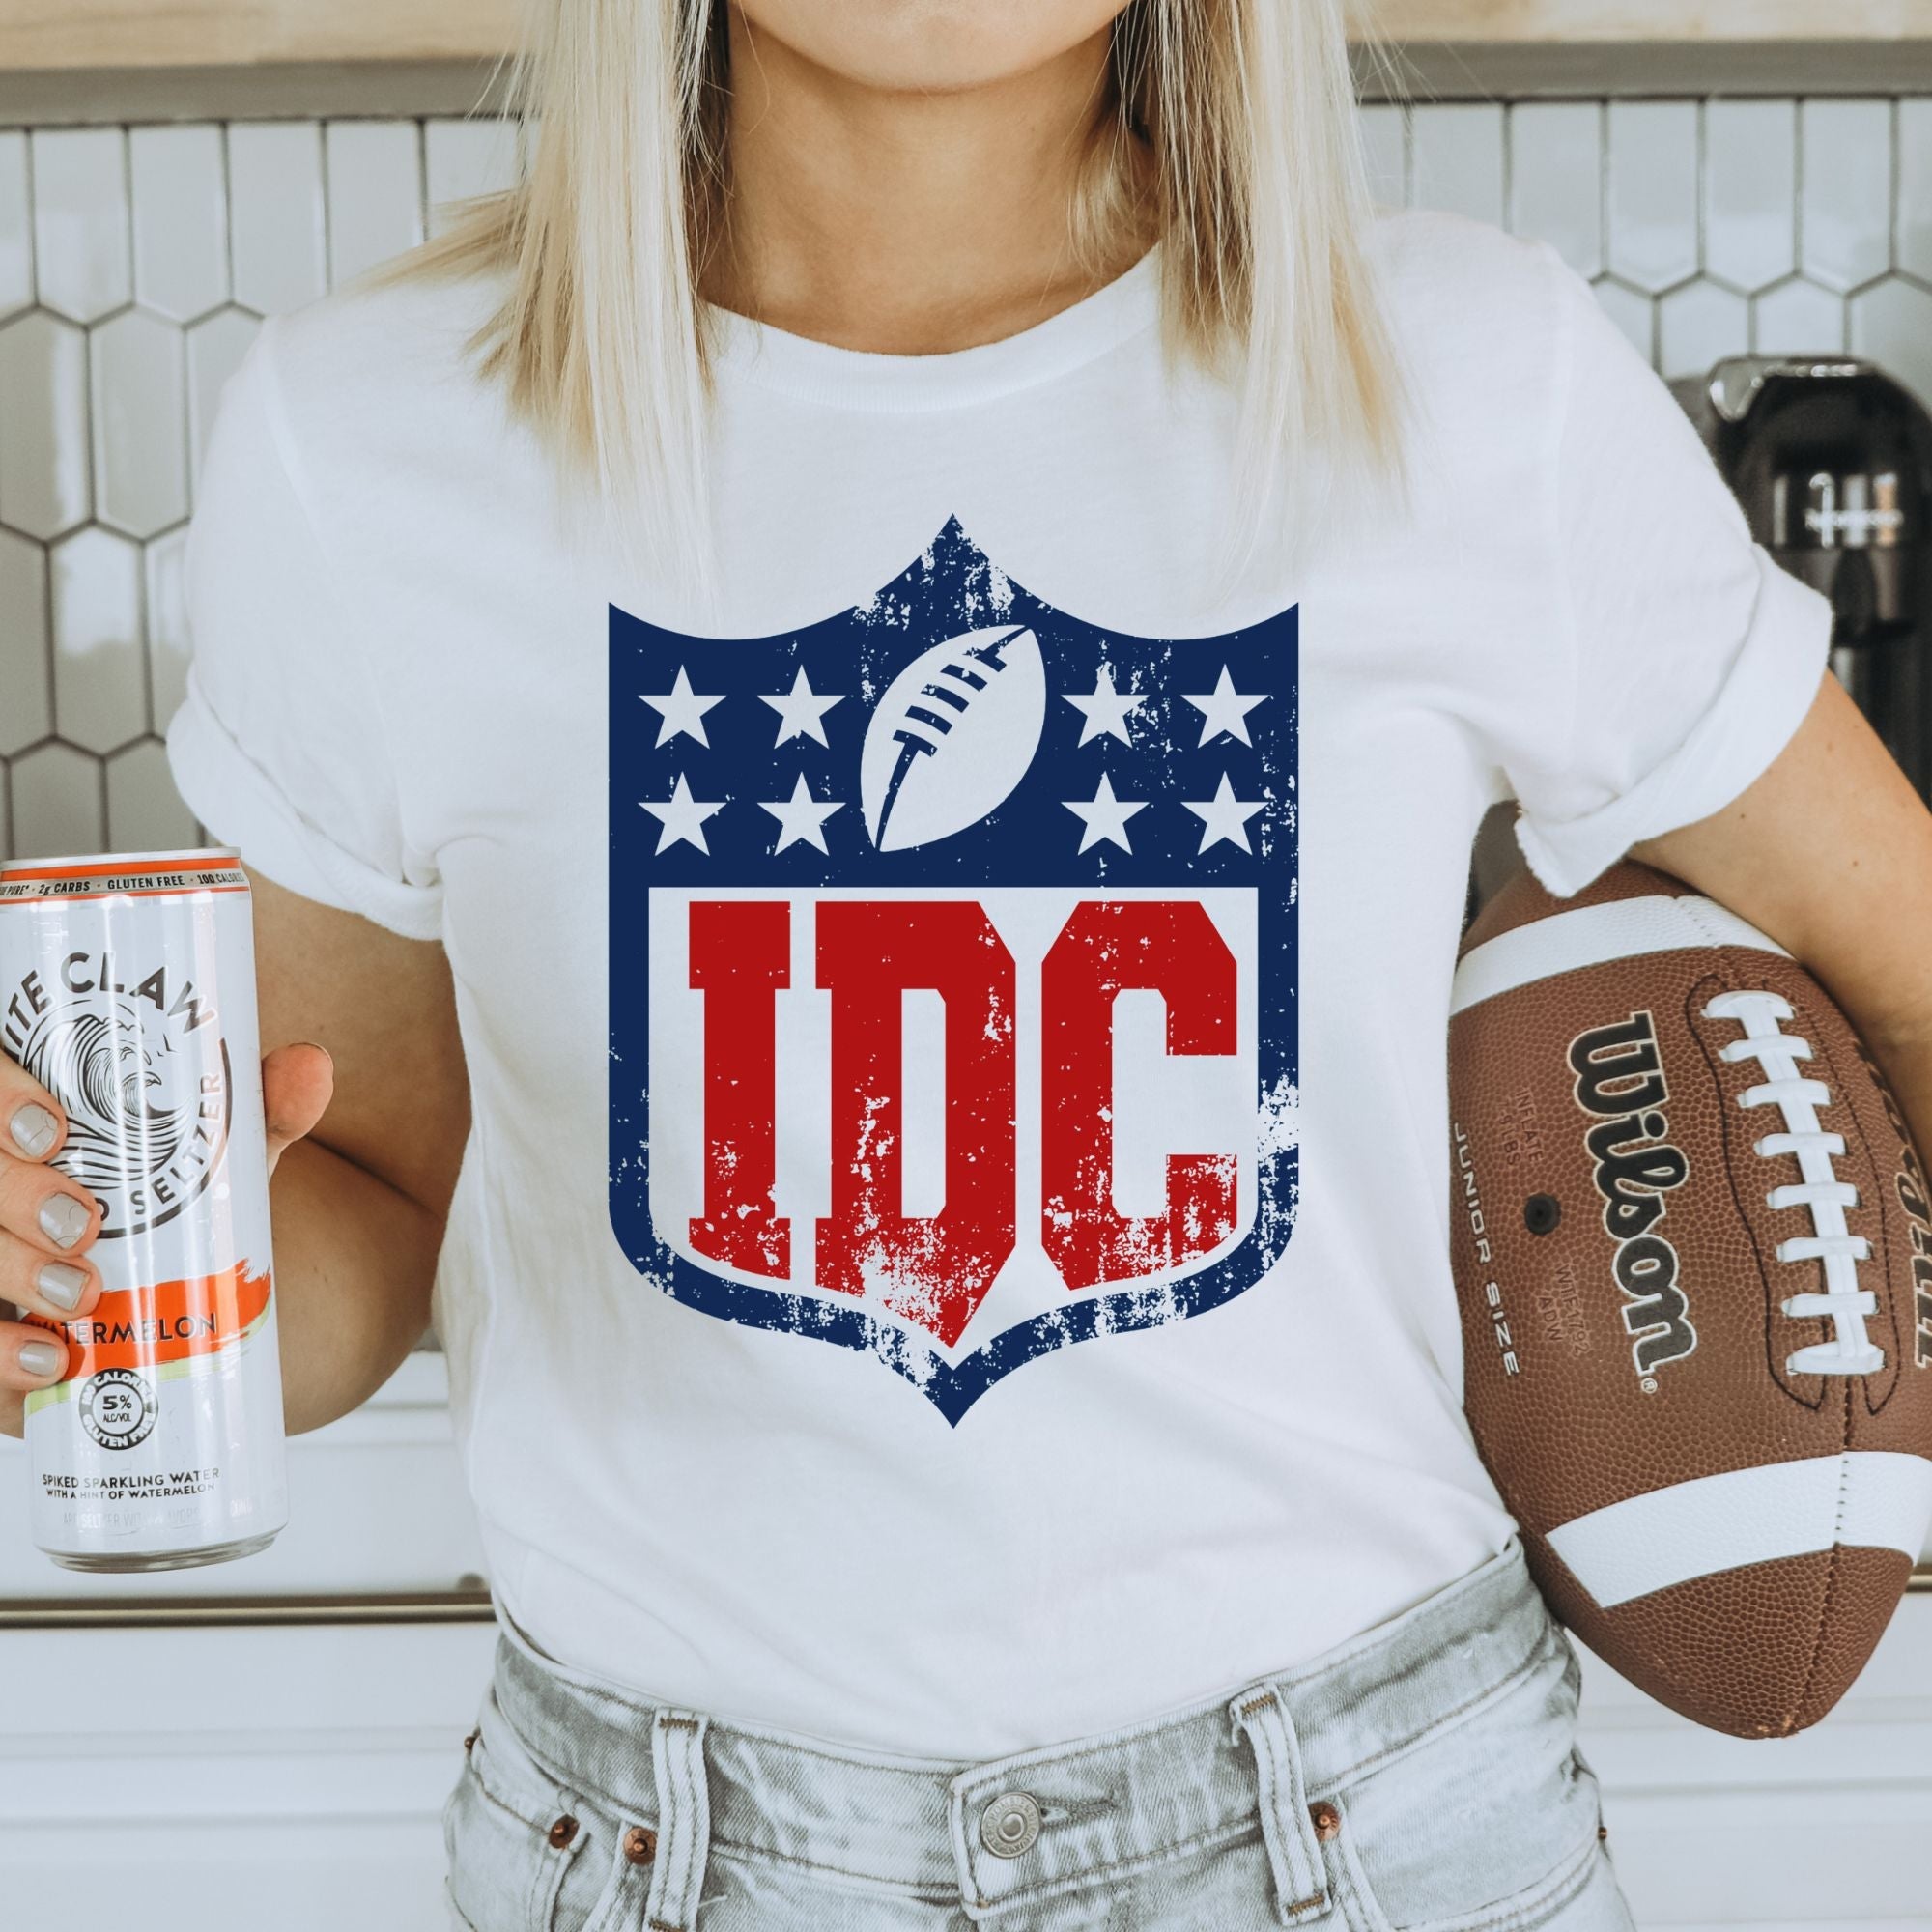 Hilarious Football Graphic Tee *UNISEX FIT*-Graphic Tees-208 Tees Wholesale, Idaho